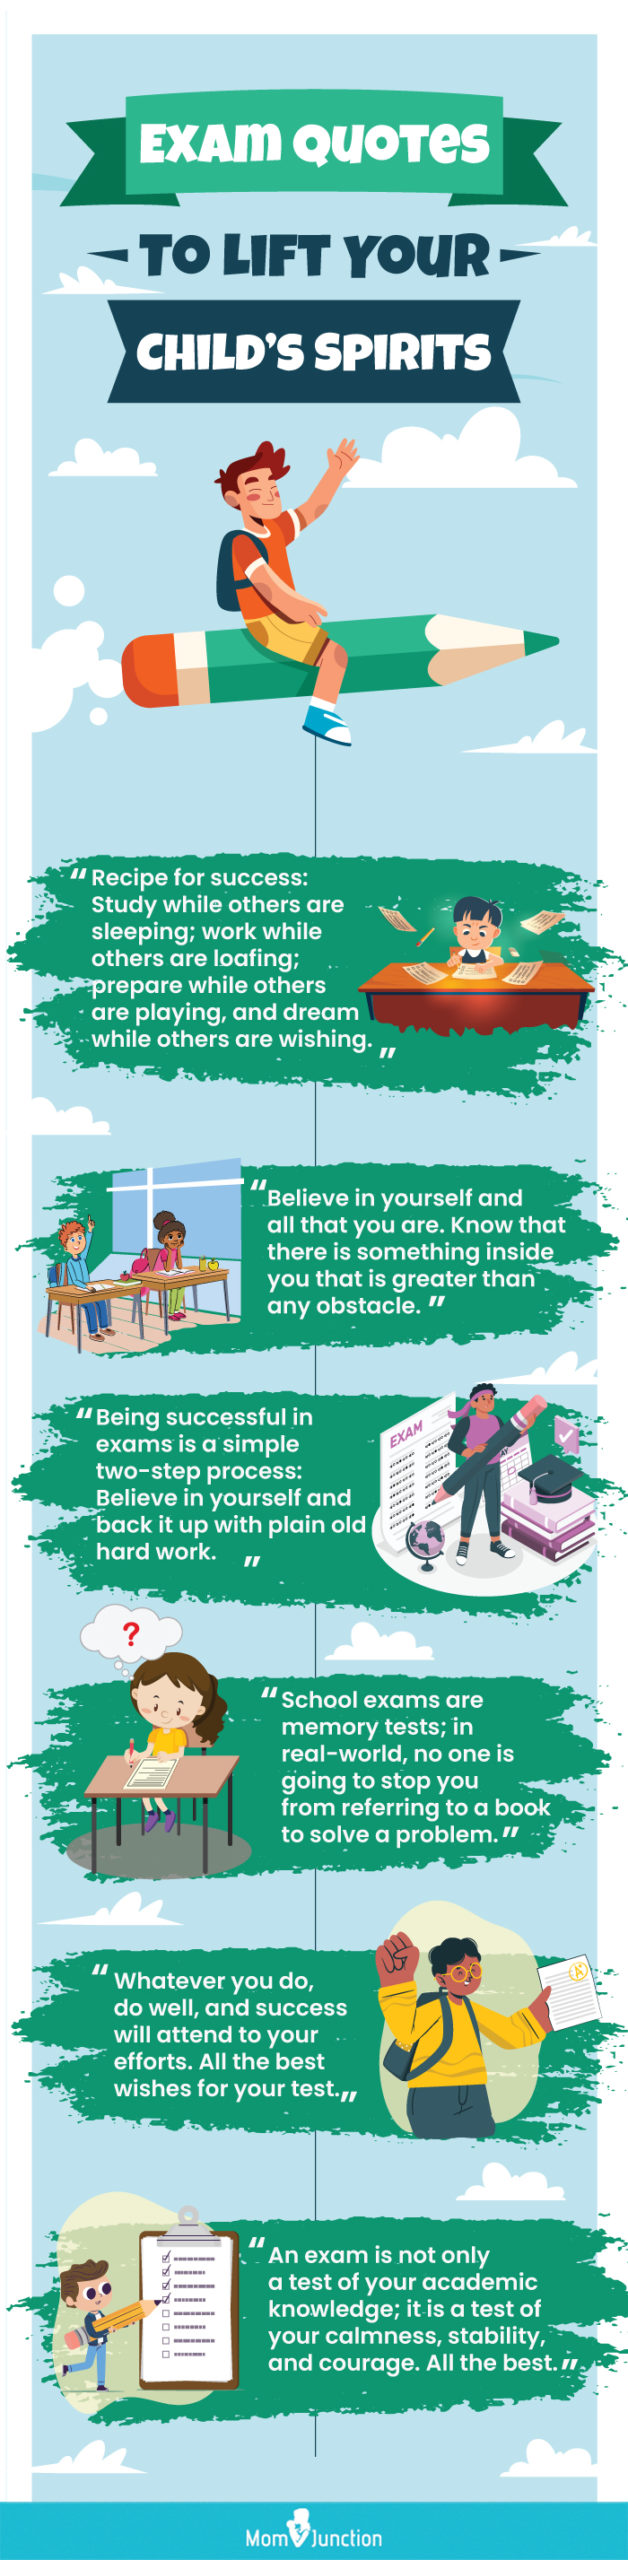 exam quotes to lift your child’s spirits (infographic)